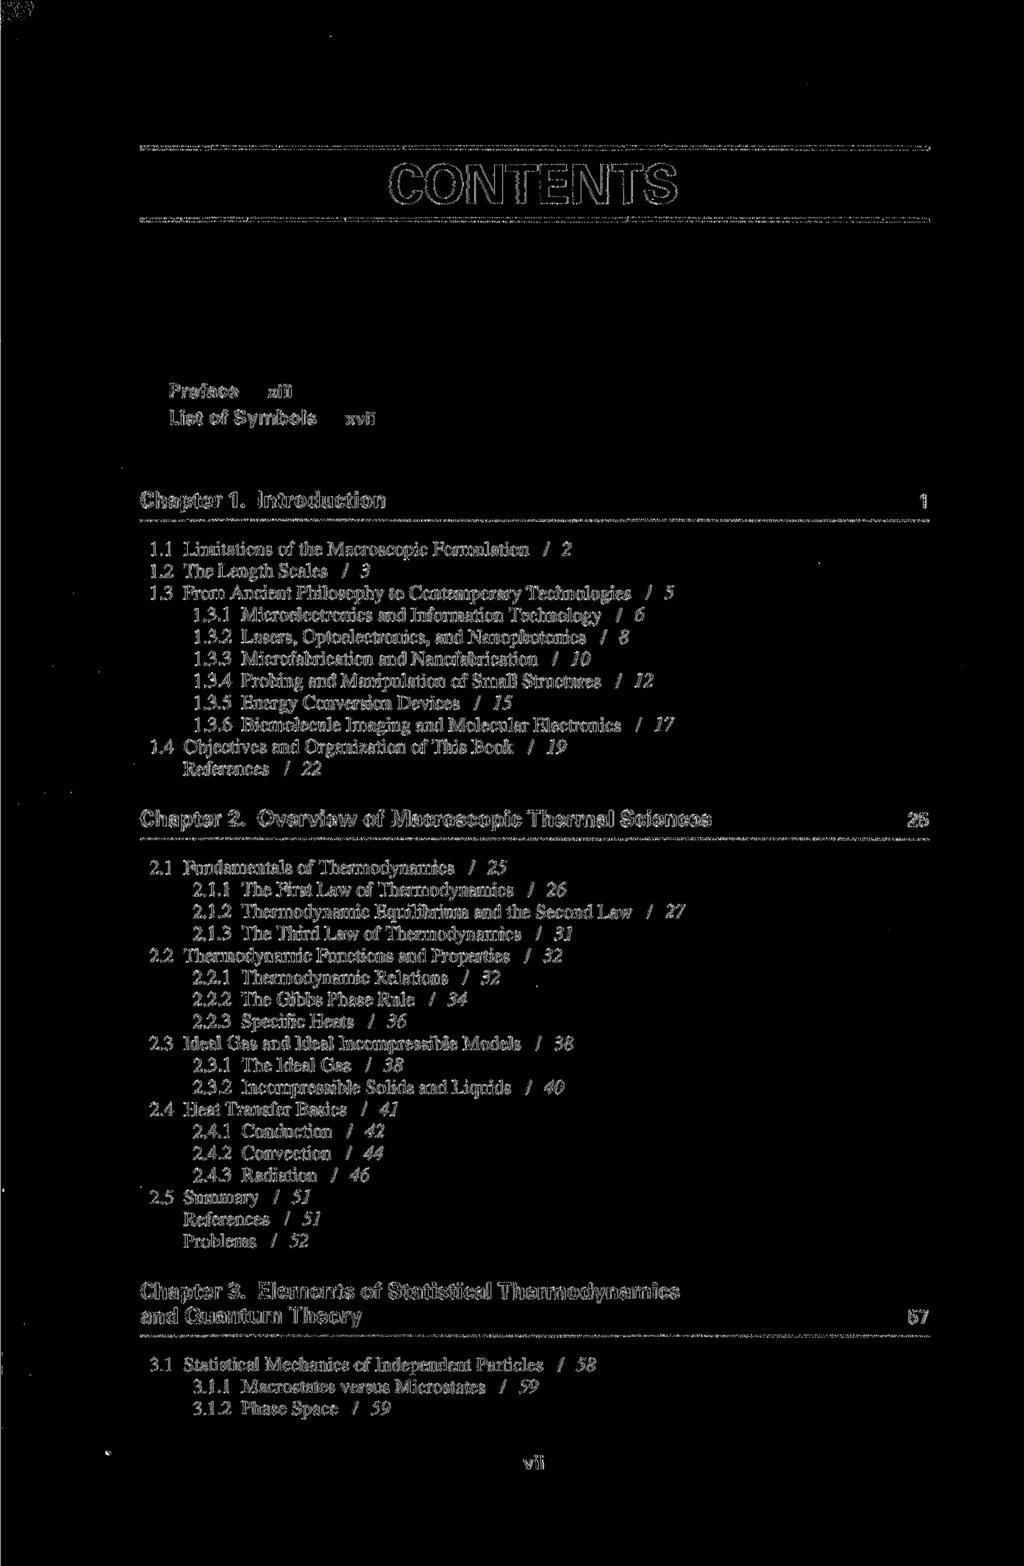 CONTENTS Preface xiii List of Symbols xvii Chapter 1. Introduction 1 l. I Limitations of the Macroscopic Formulation / 2 1.2 The Length Scales / 3 1.